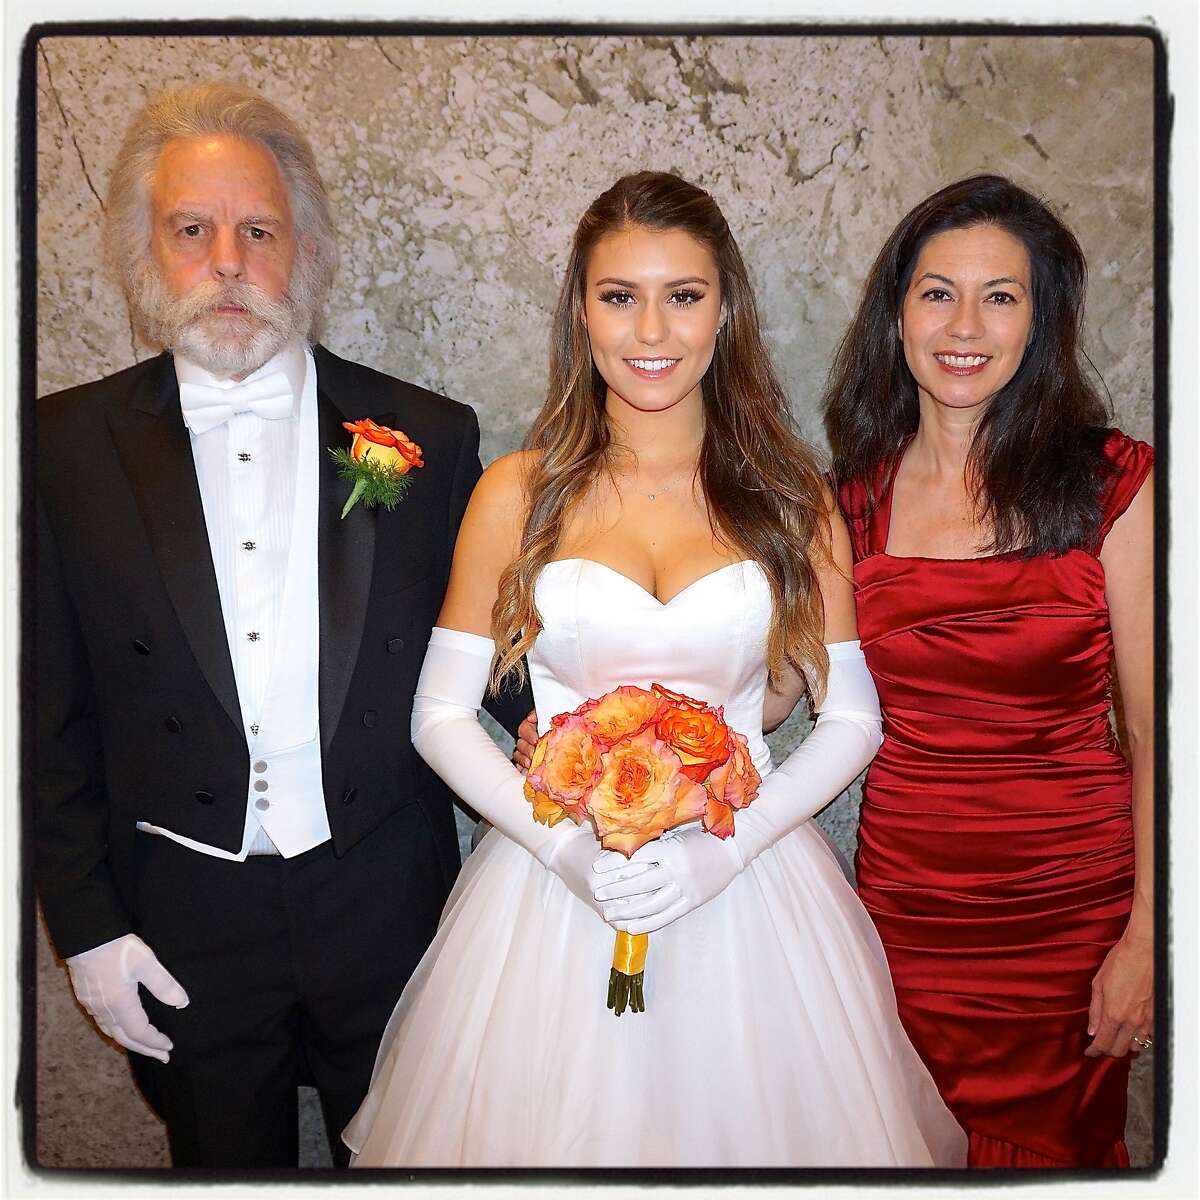 Grateful Dead guitarist Bob Weir (left) with his daughter, Shala, and wife, Natascha Weir, at CPMC's San Francisco Debutante Ball. June 2016.